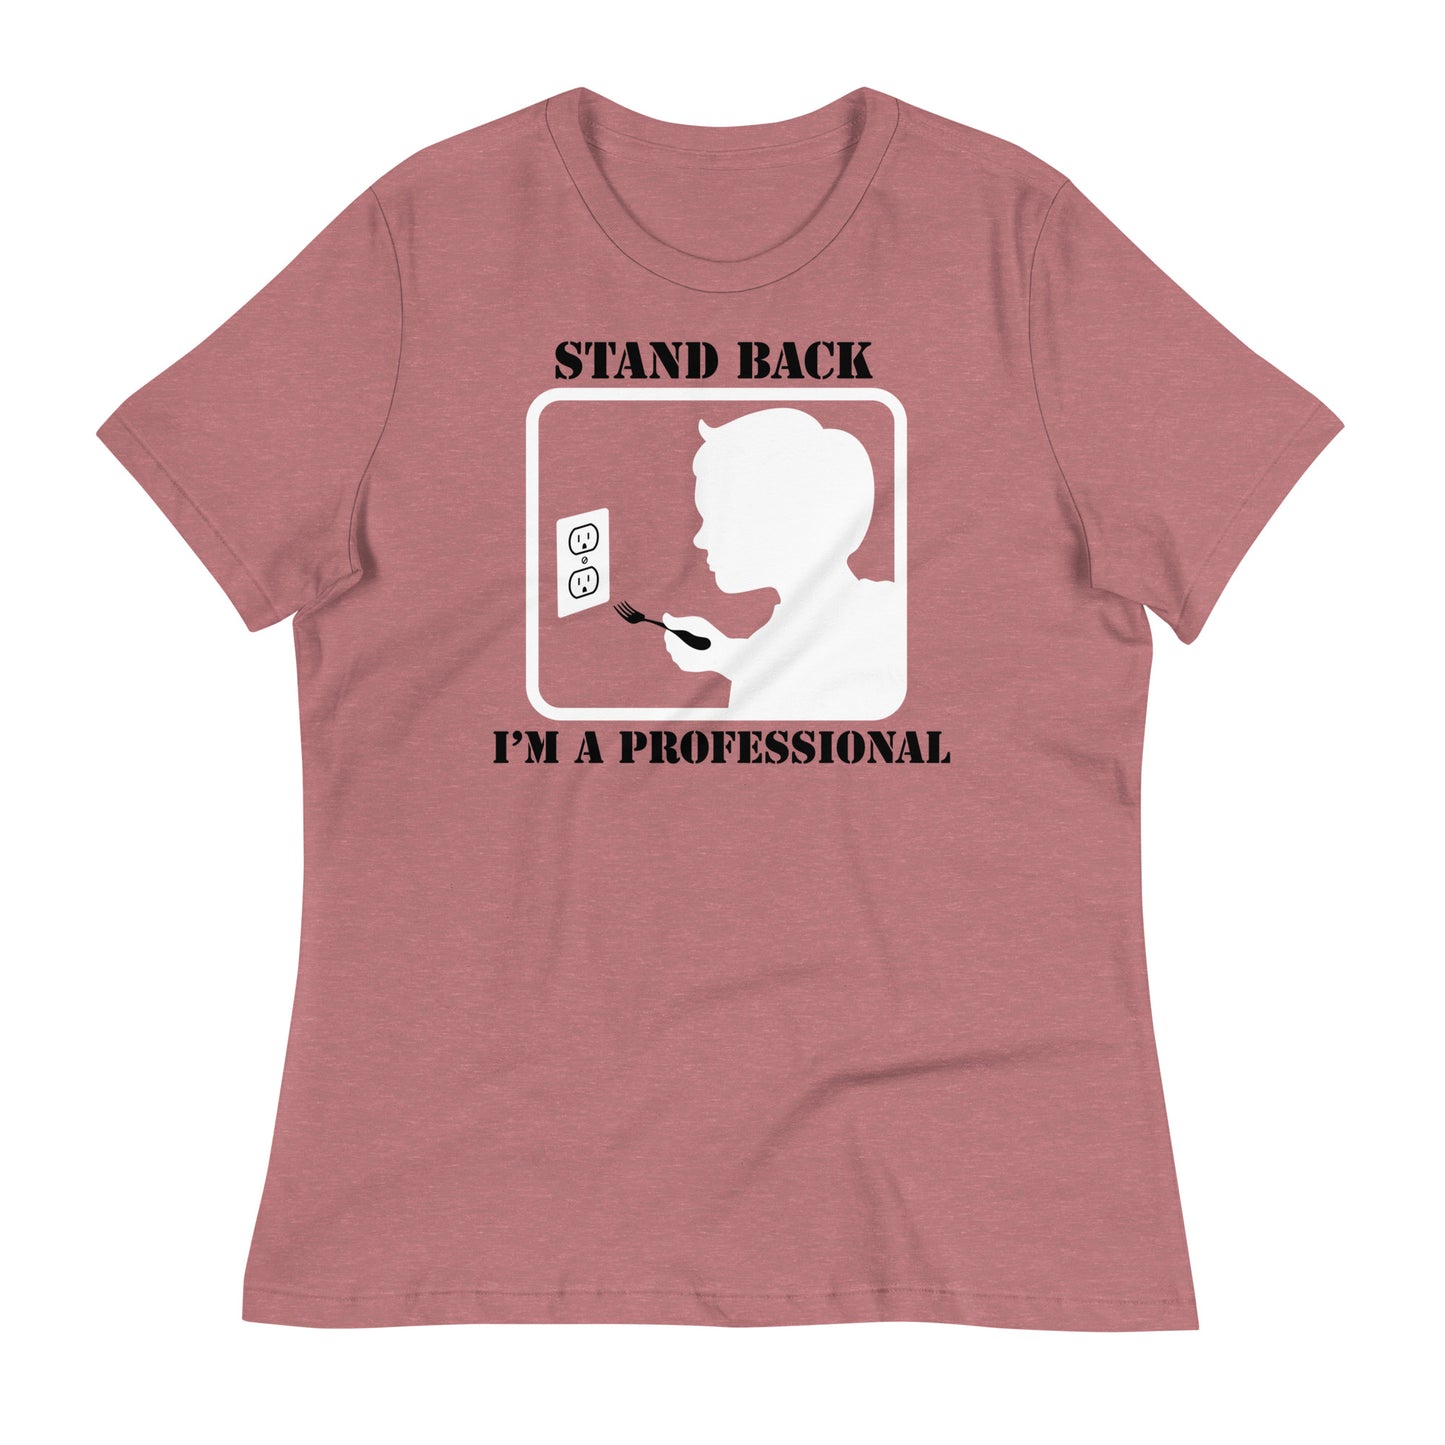 Stand Back, I'm A Professional Women's Signature Tee